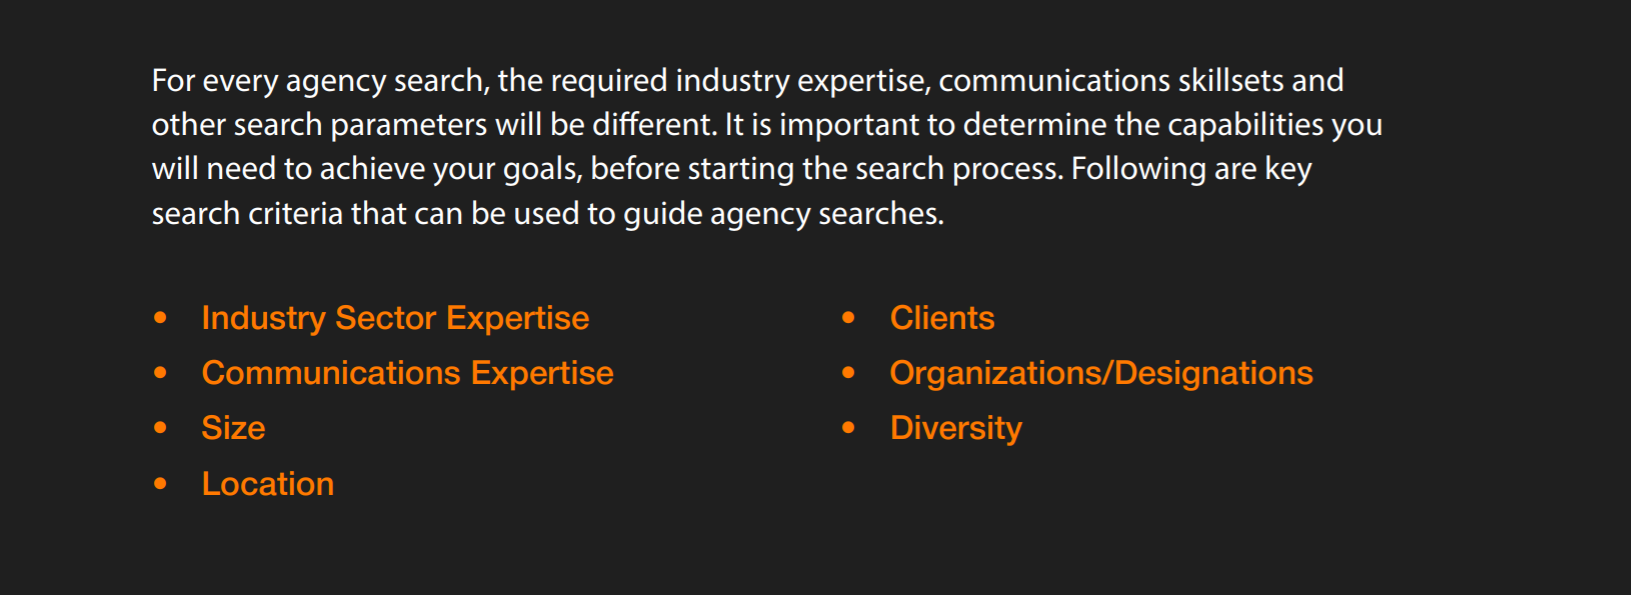 For Every Agency Search